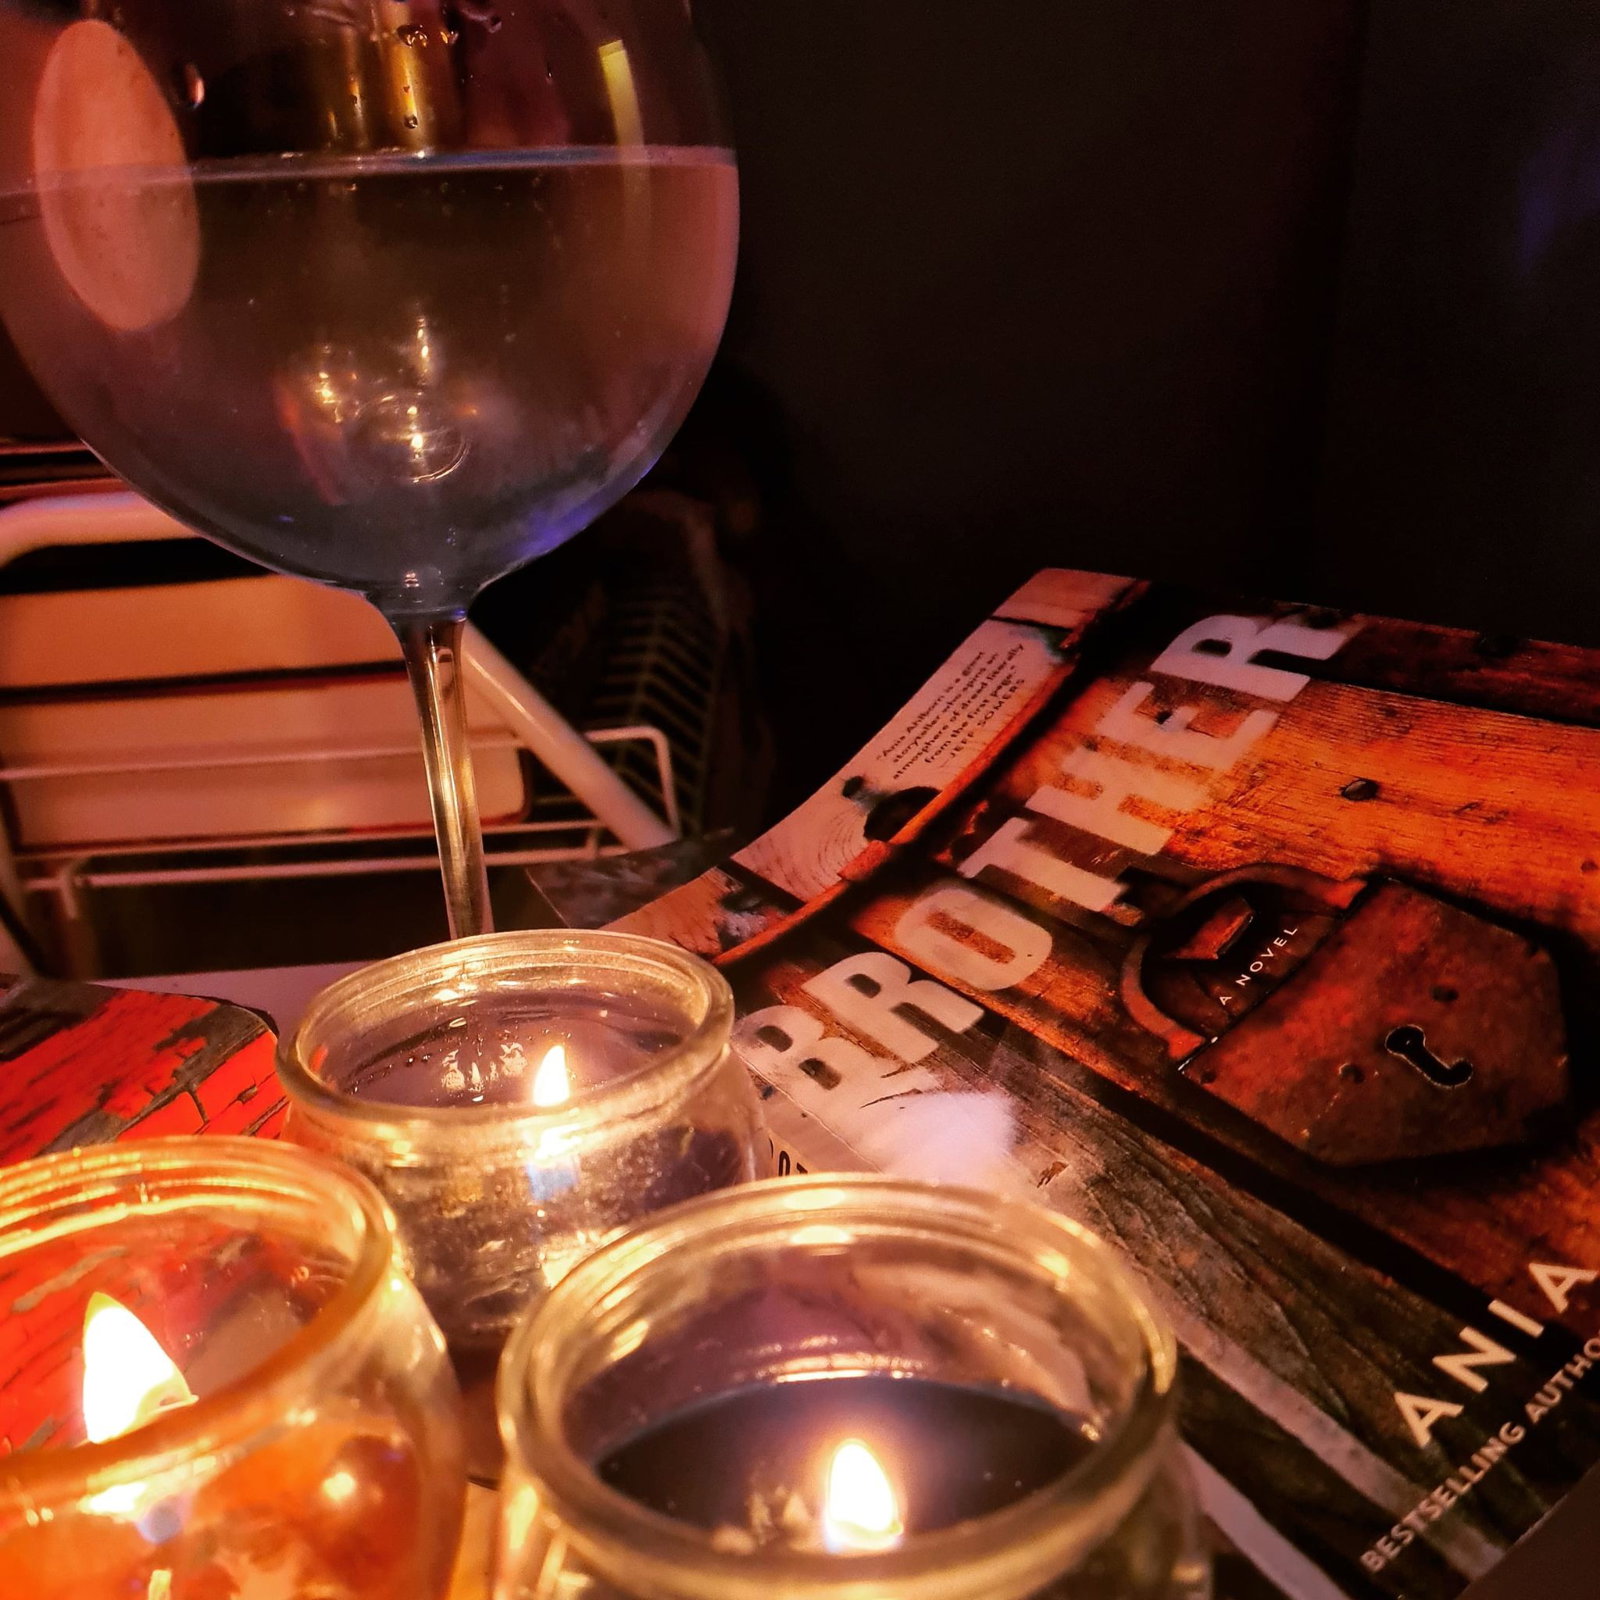 Photo by bonnie.darko with the username @bonnie.darko,  November 5, 2020 at 8:43 PM and the text says 'would you believe this is how I prefer to spend my evenings, candlelight; a good book and a large glass of gin.. Would you like posts like this of my genuine self too? Would that feel personalised? Let me know'